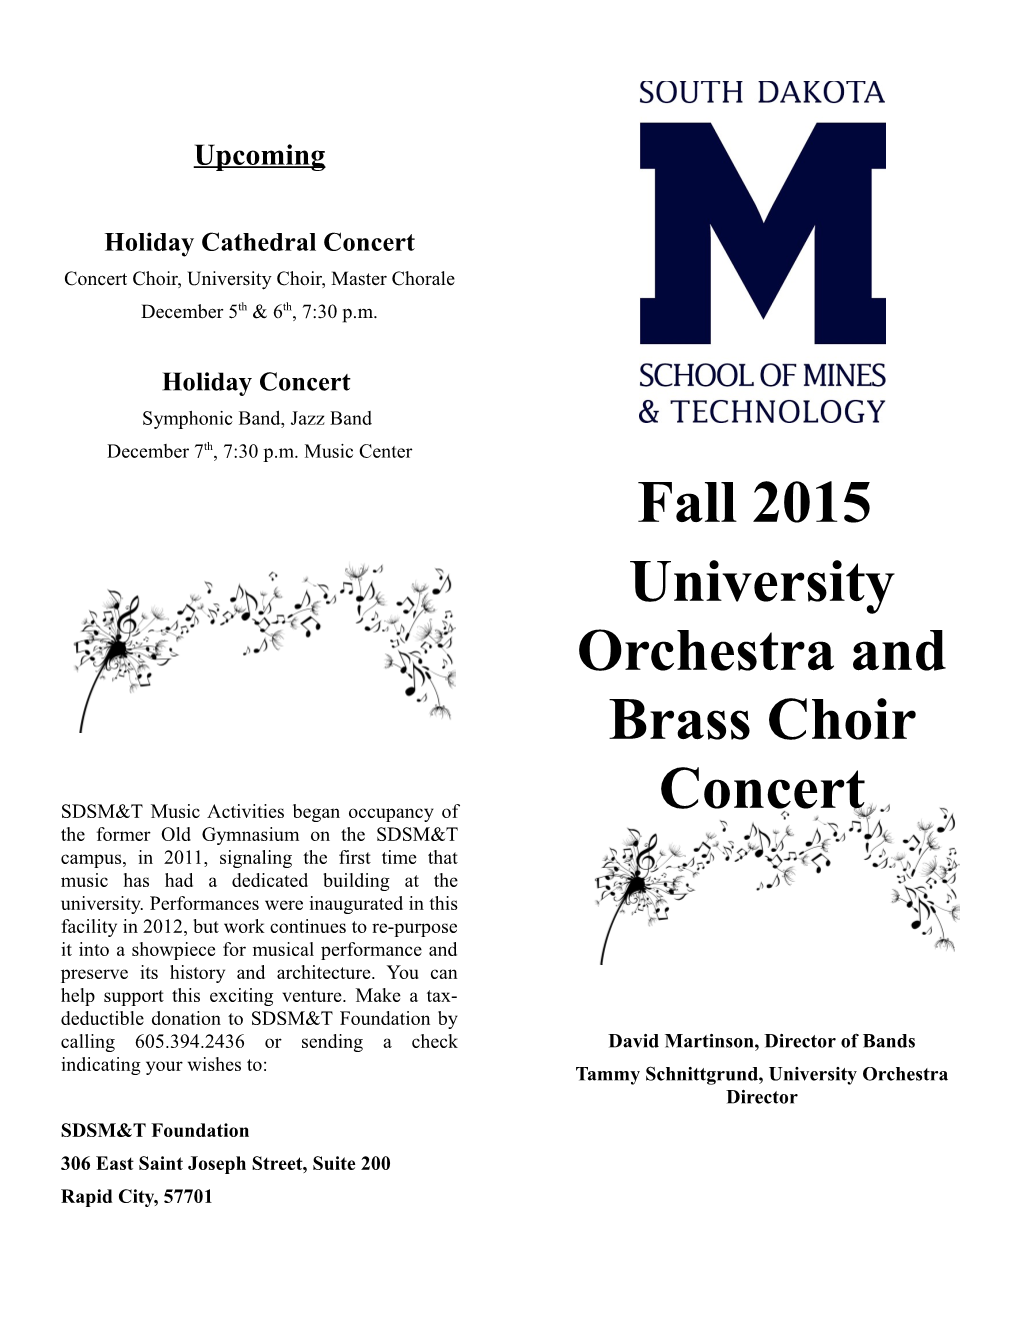 Fall 2015 University Orchestra and Brass Choir Concert